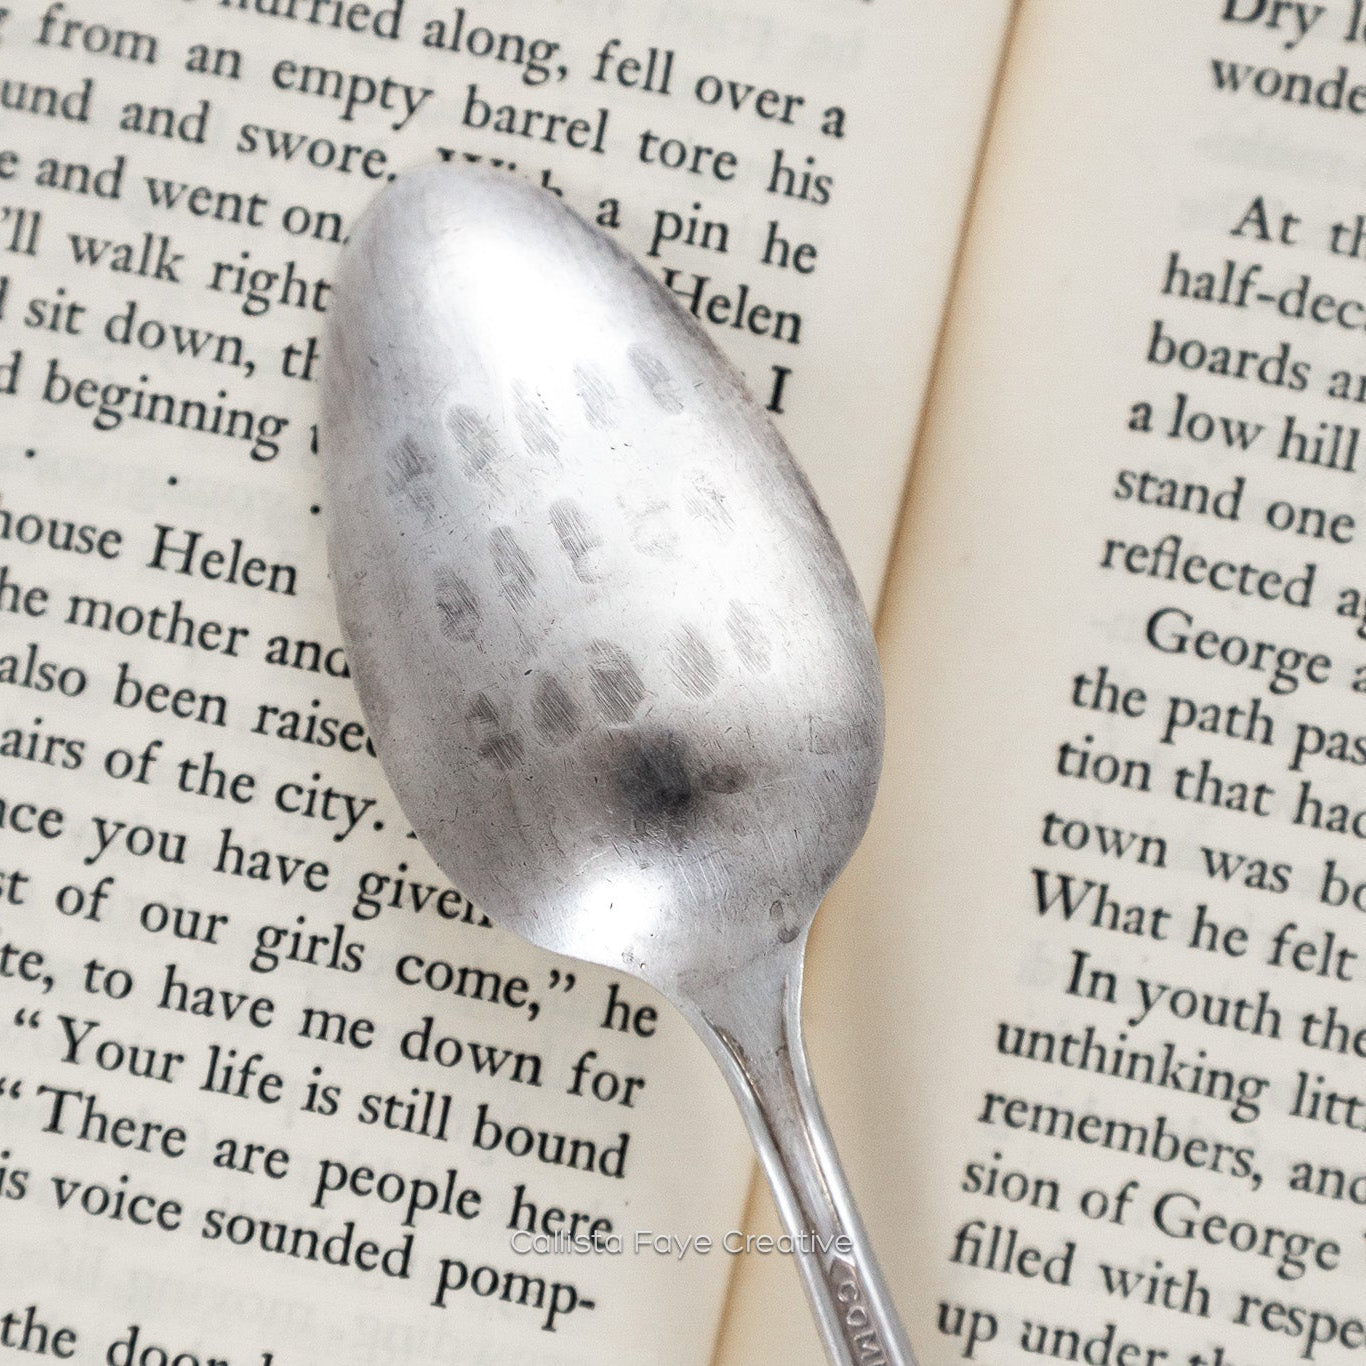 Do Epic Shit, Hand Stamped Vintage Spoon Spoons callistafaye   